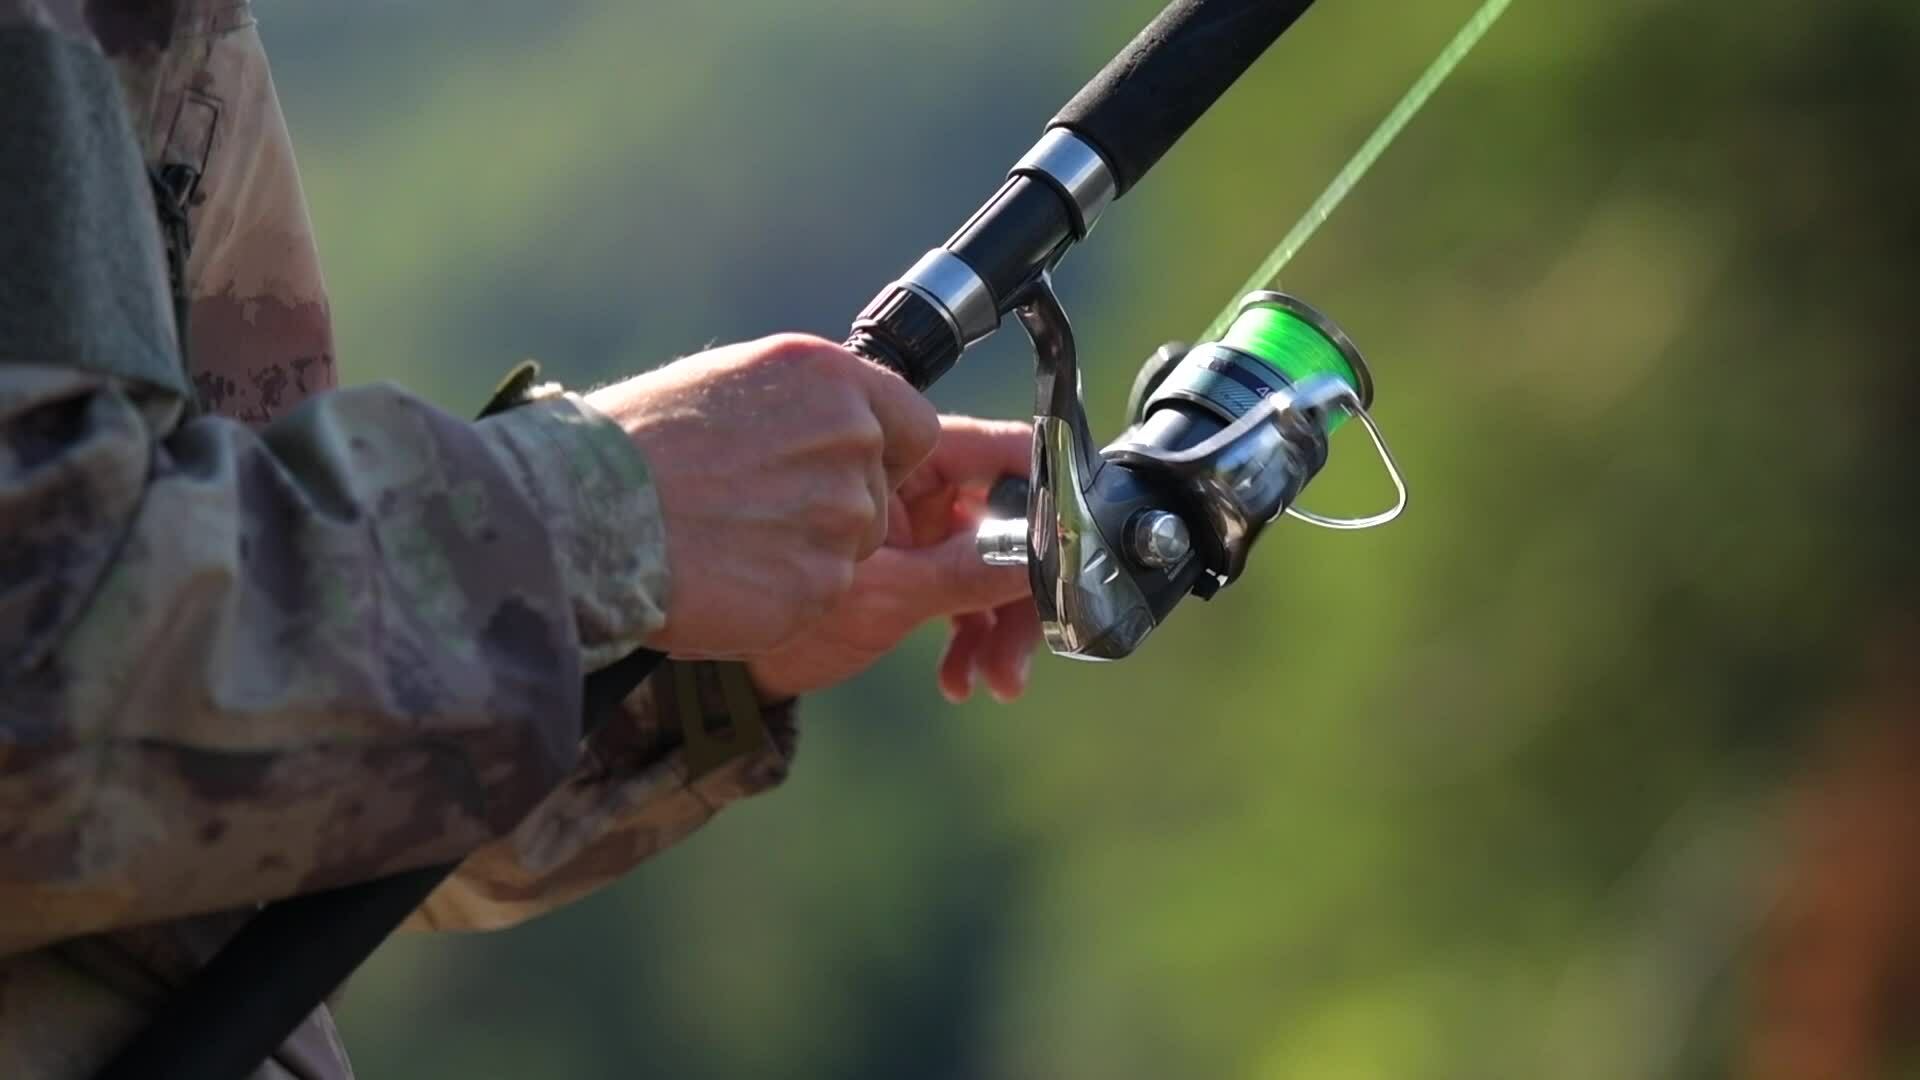 https://static.vecteezy.com/system/resources/thumbnails/024/480/179/original/fishing-rod-in-action-slow-motion-footage-fly-fishing-video.jpg